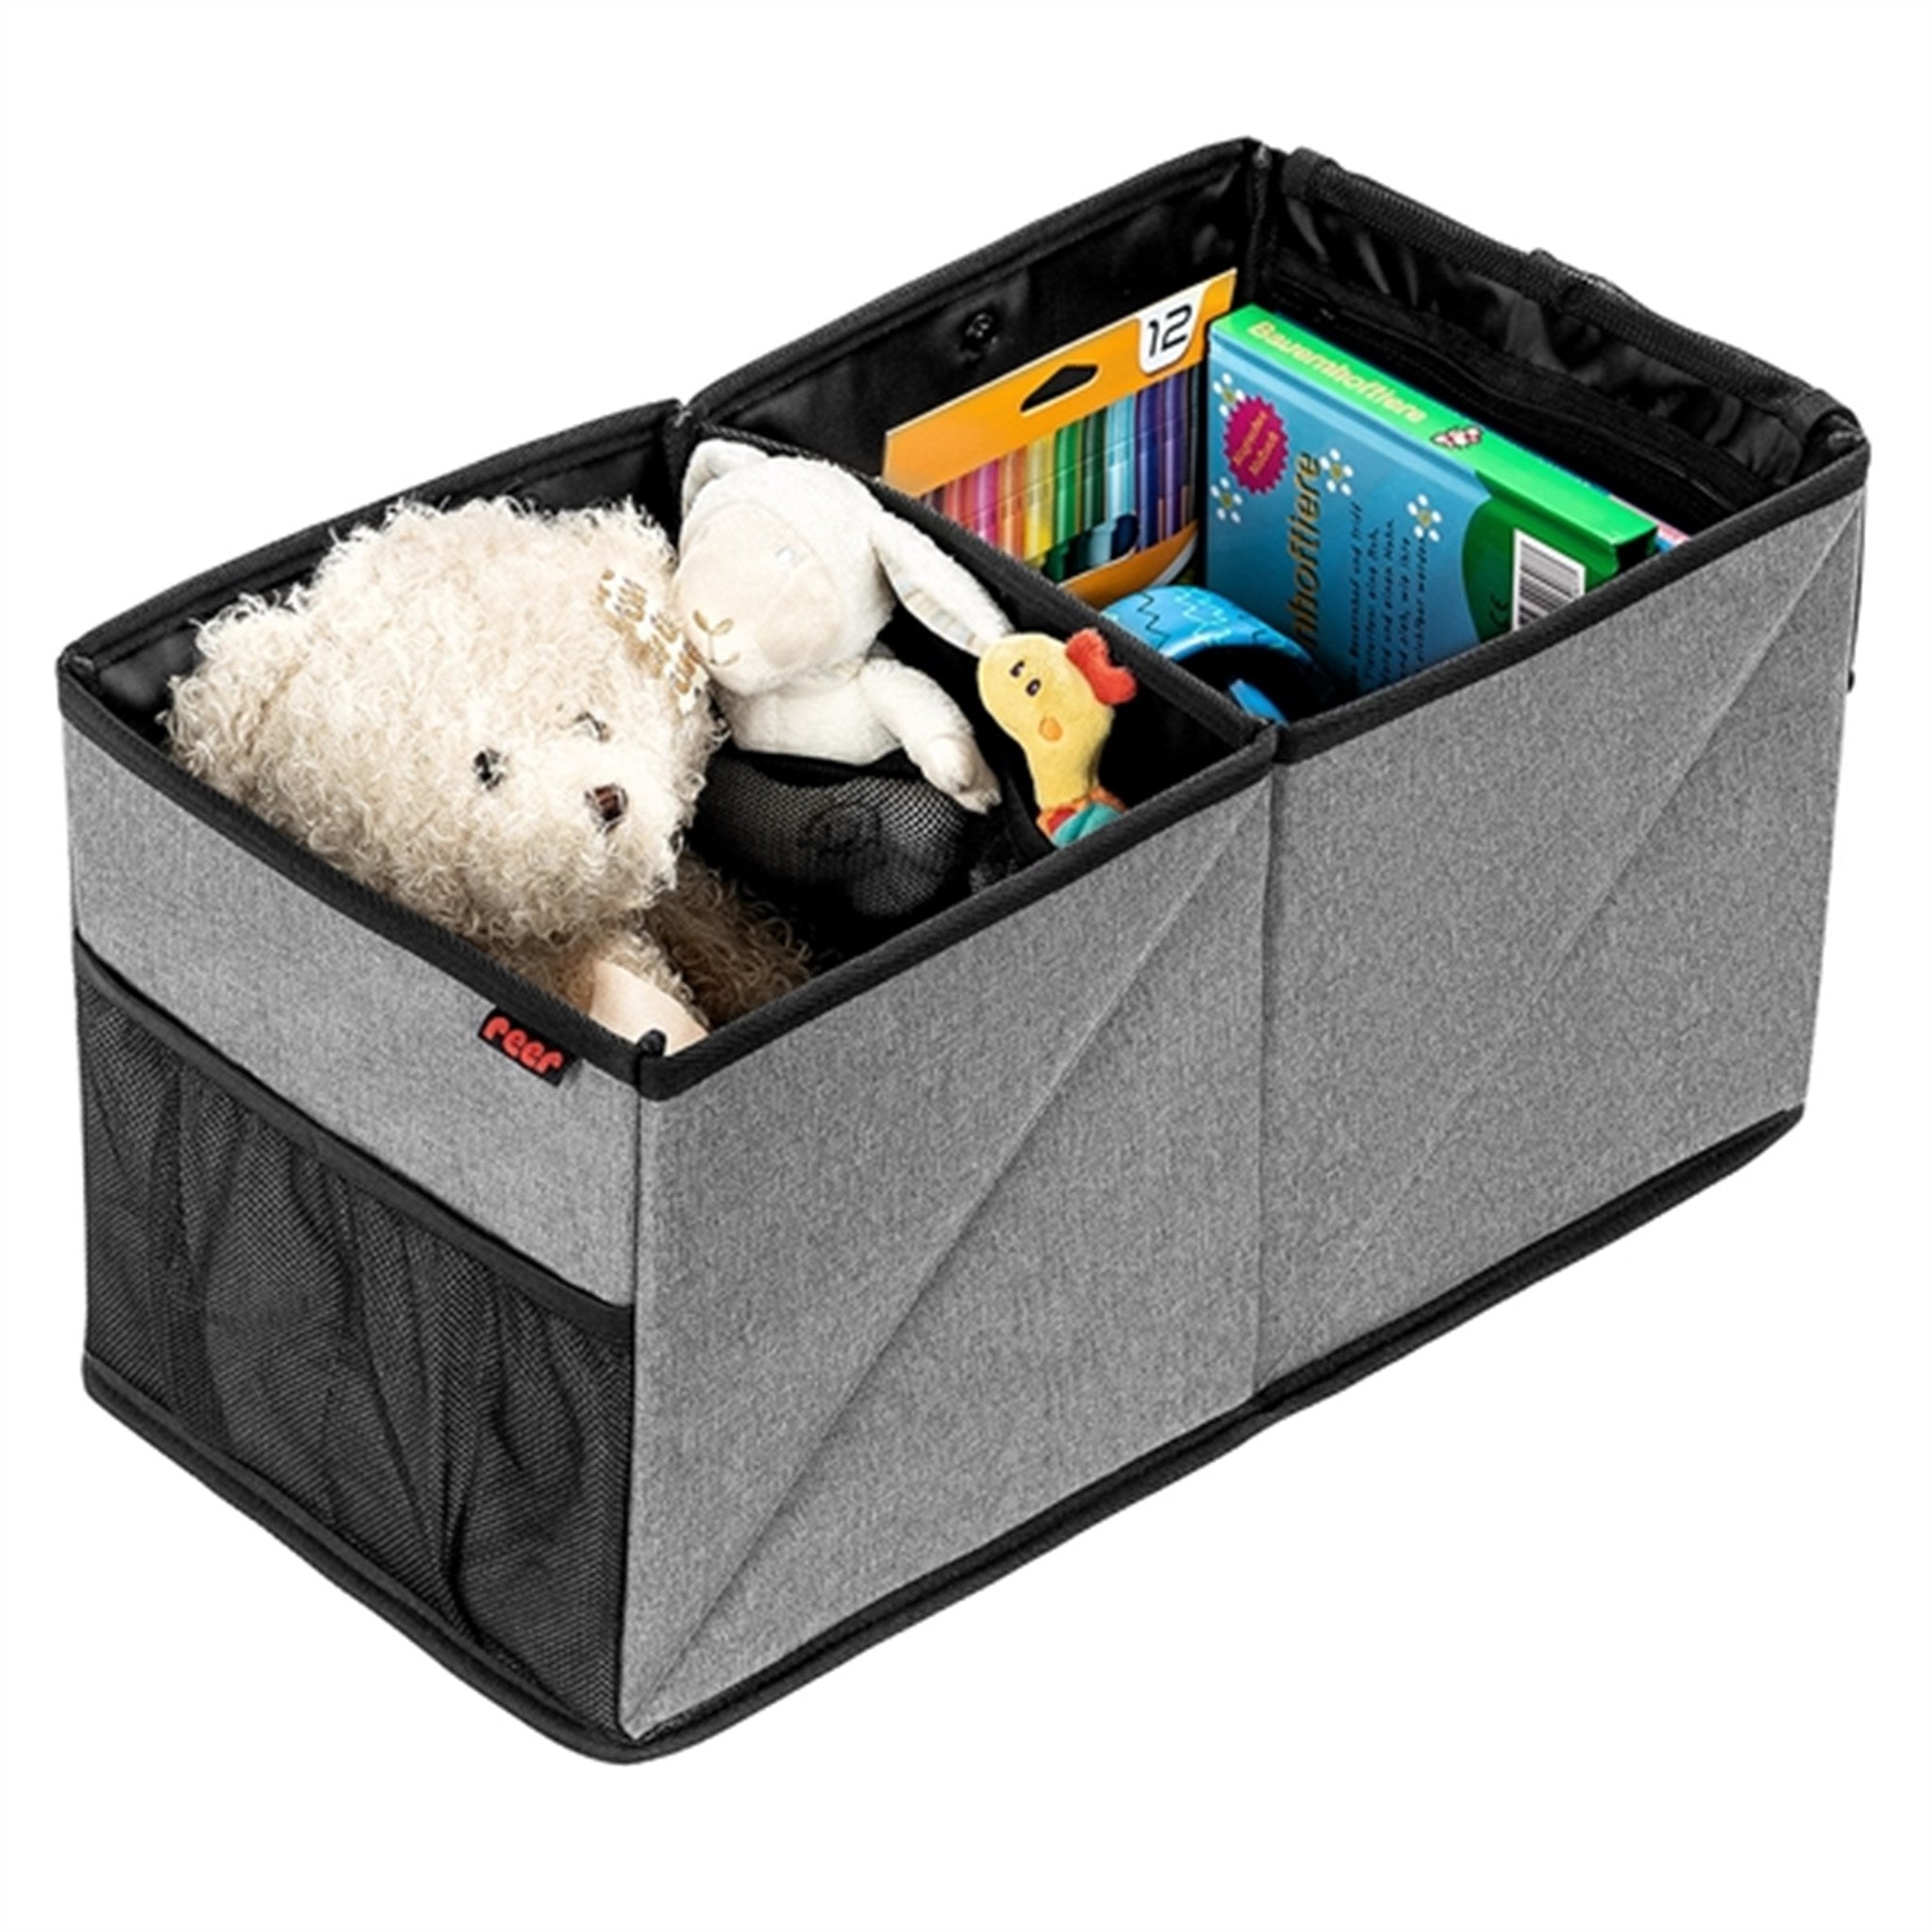 REER Storage Box for the Car